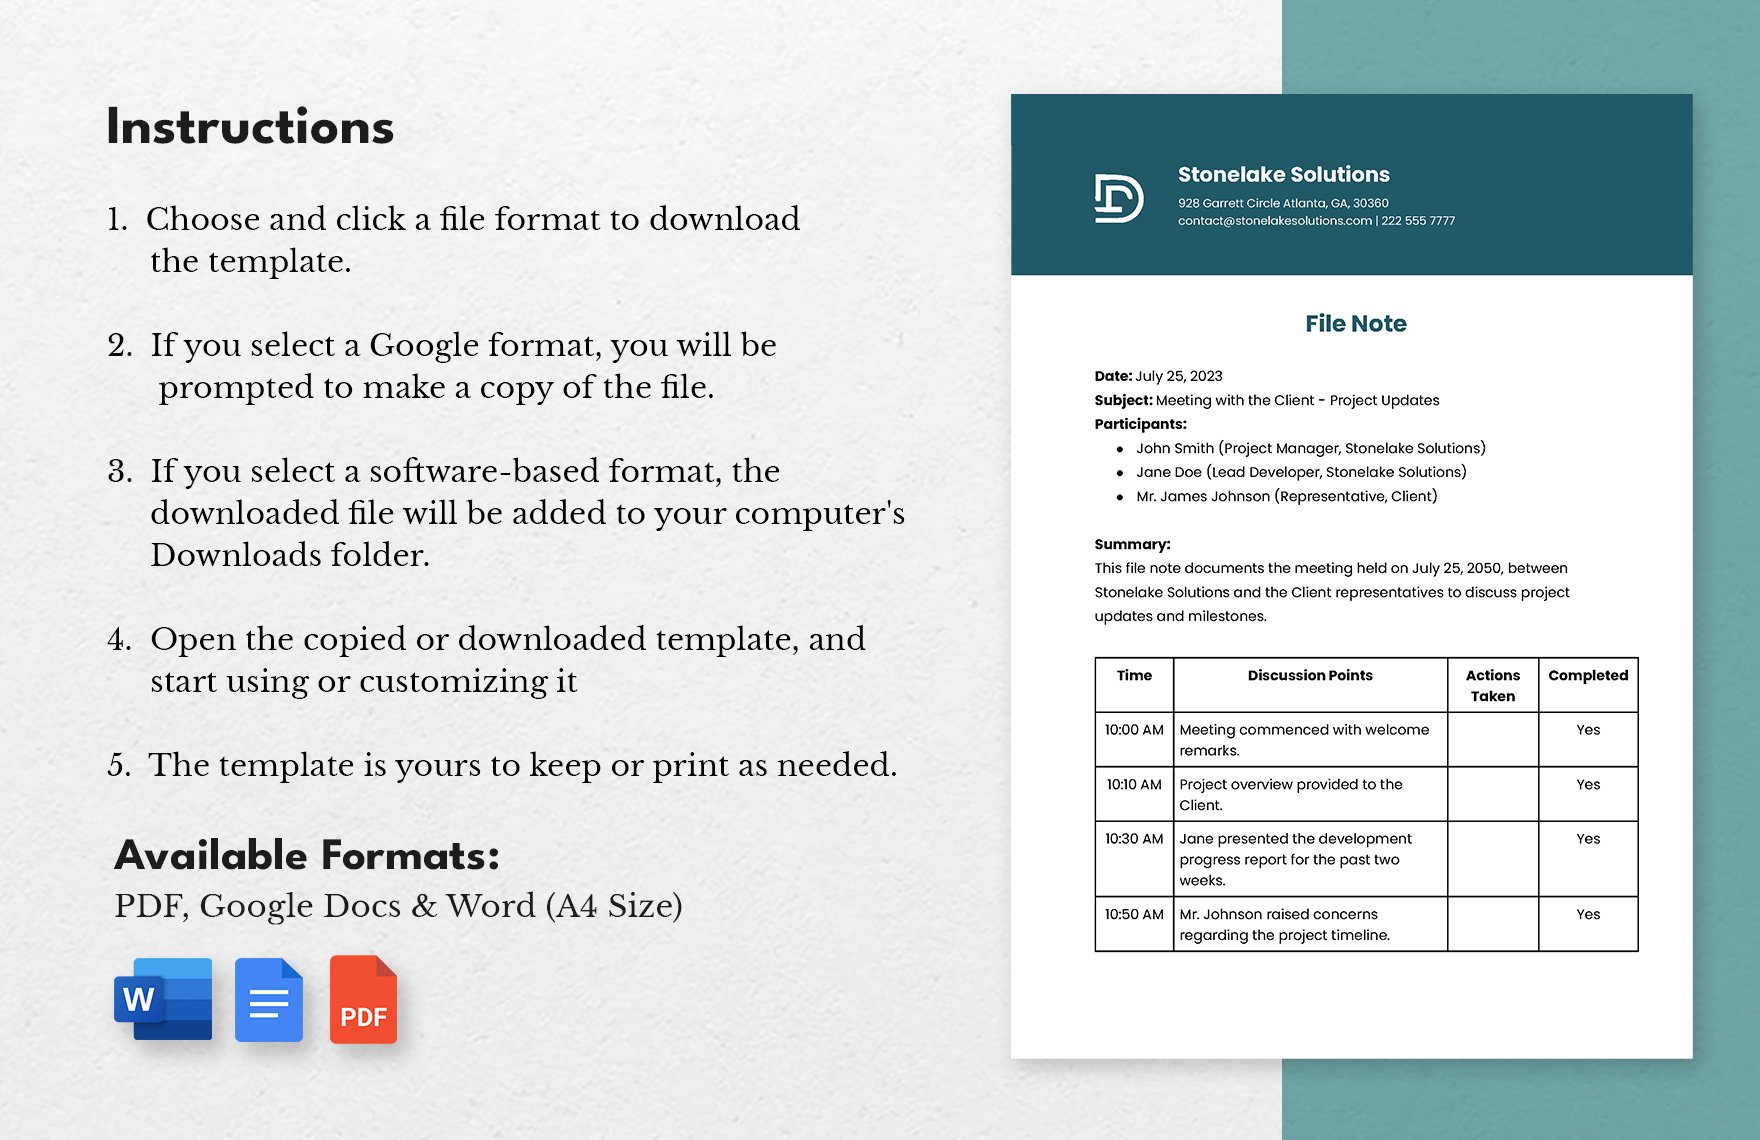 File Note Template